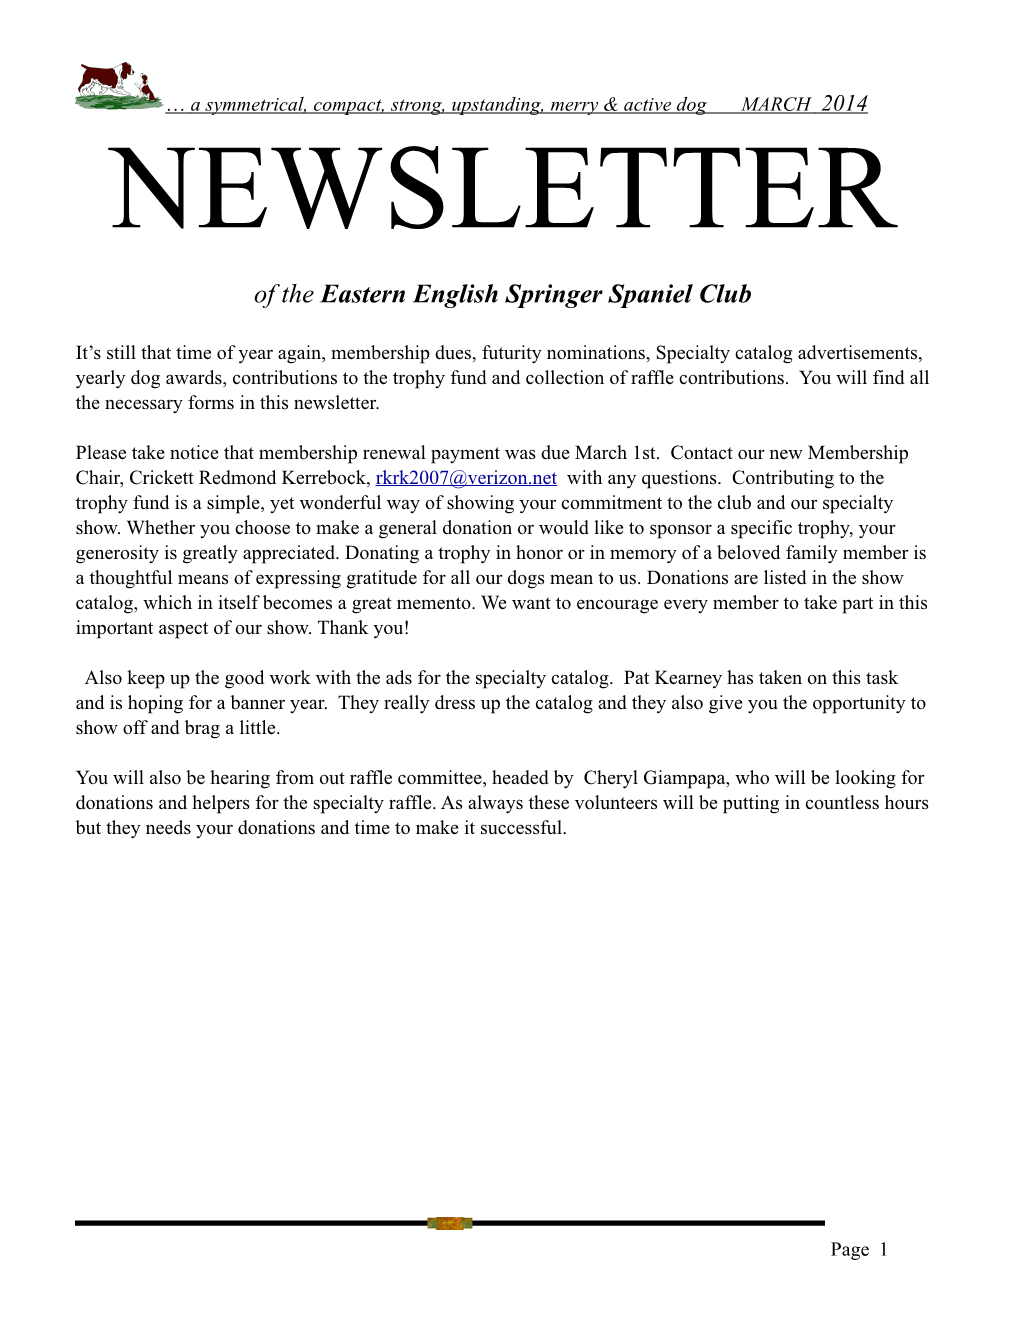 March Newsletter 2014 Email Version